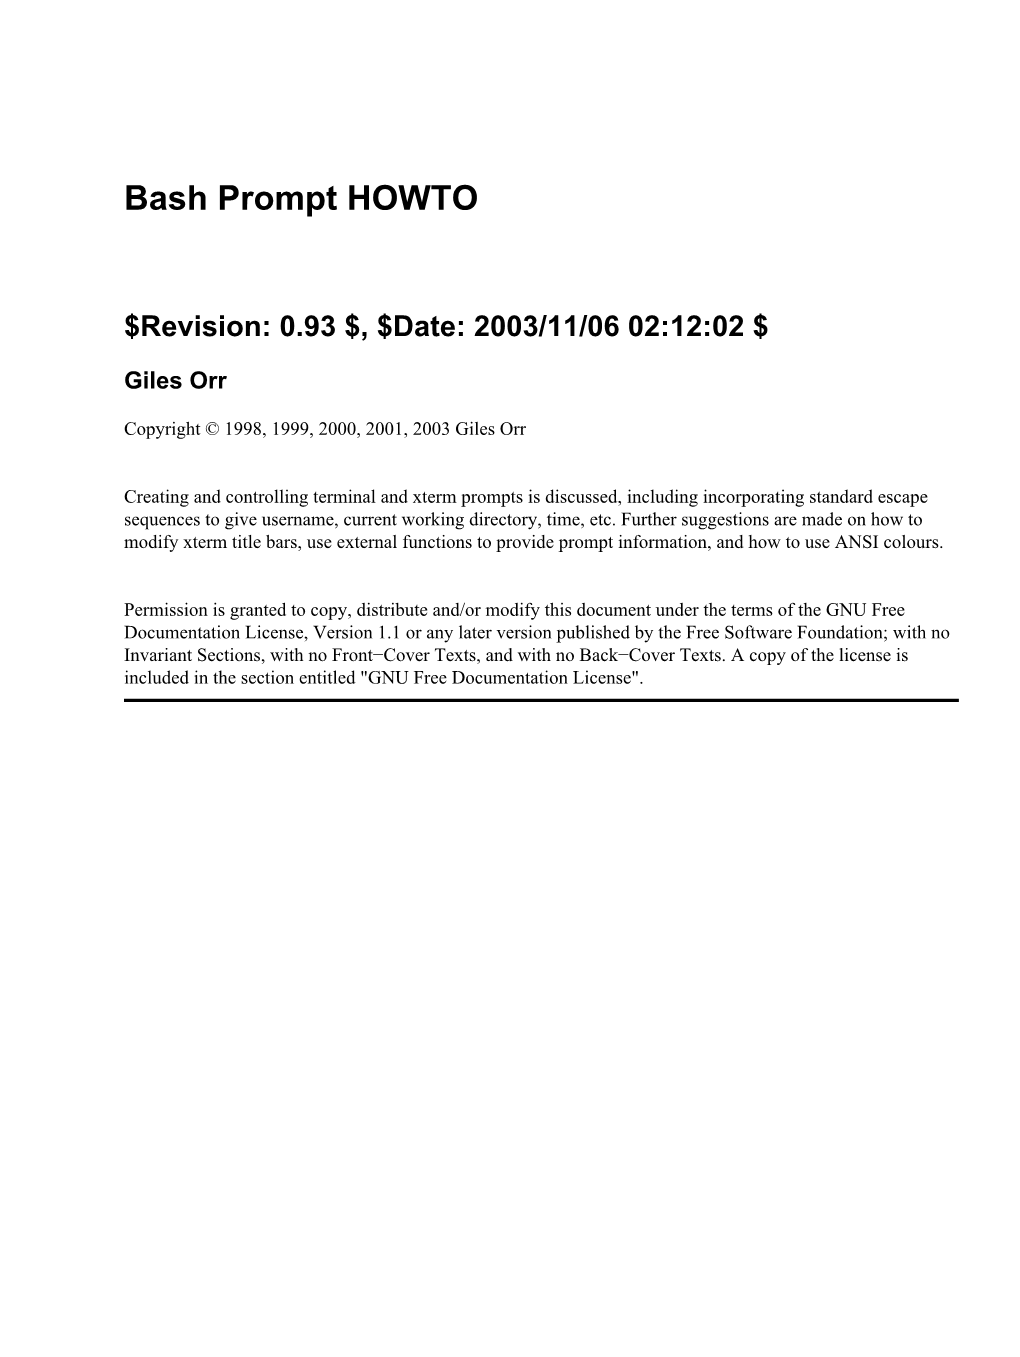 Bash-Prompt-HOWTO.Pdf